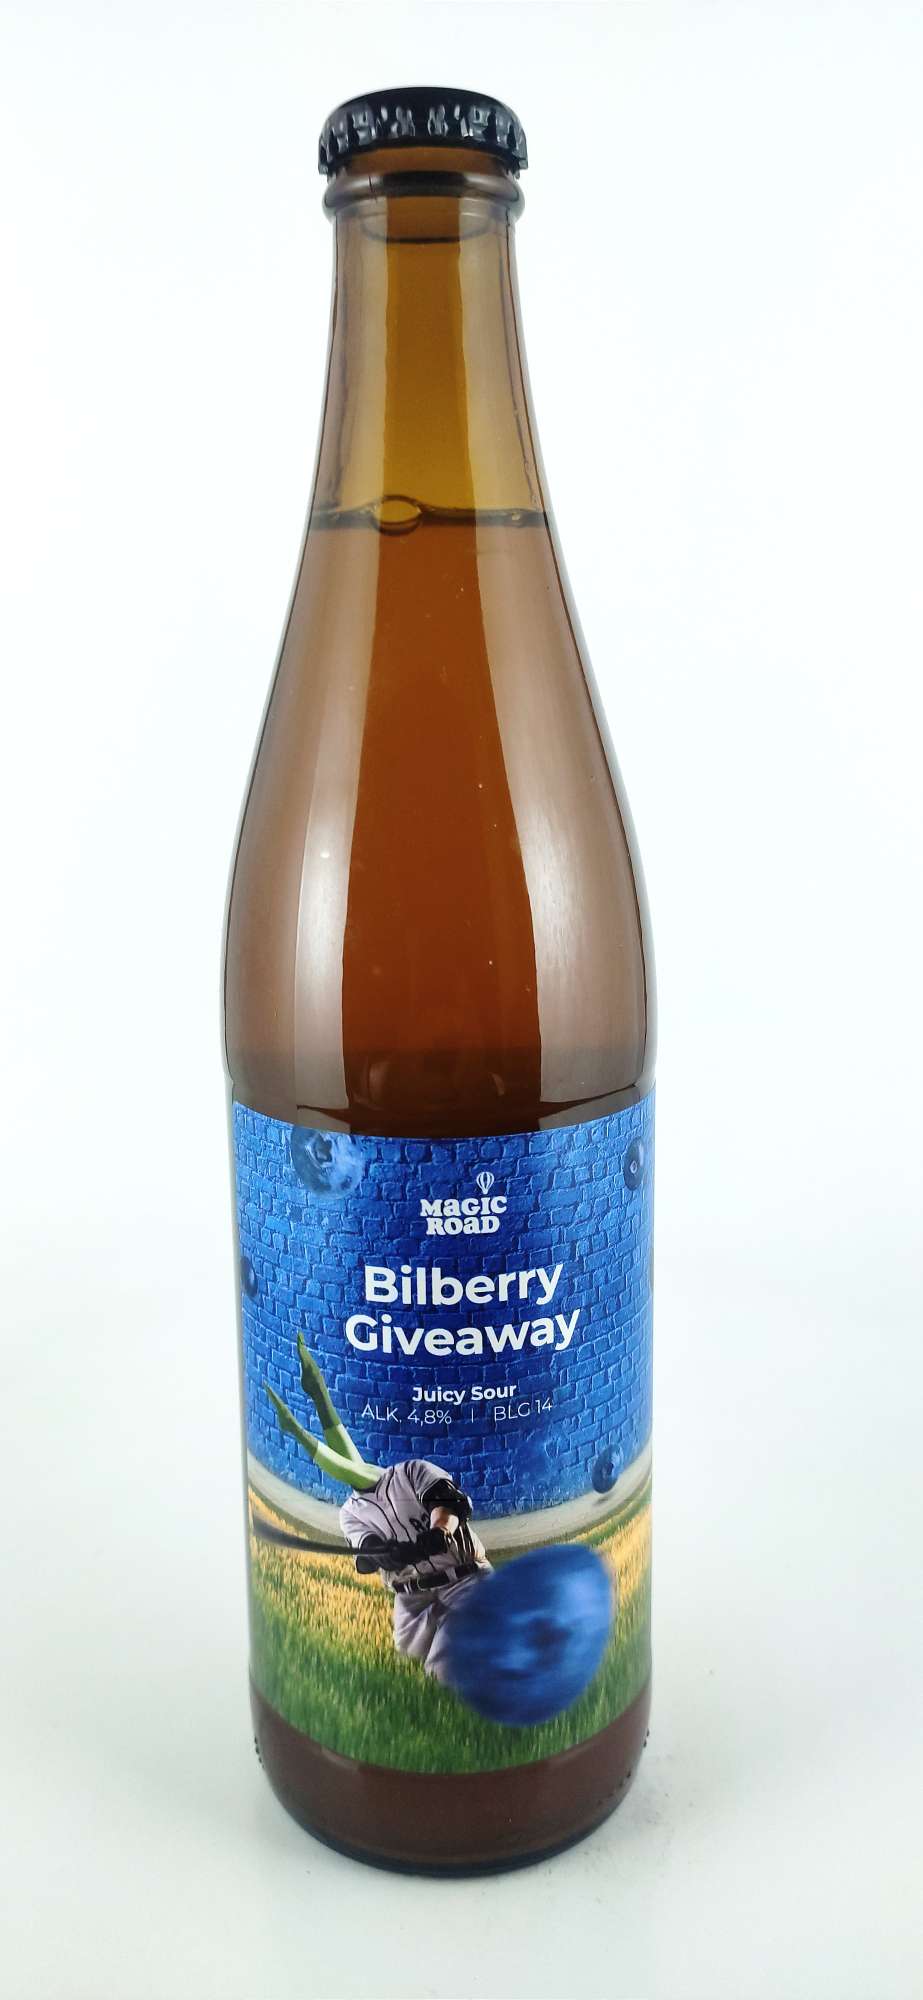 Magic Road Bilberry Giveaway Sour 14°